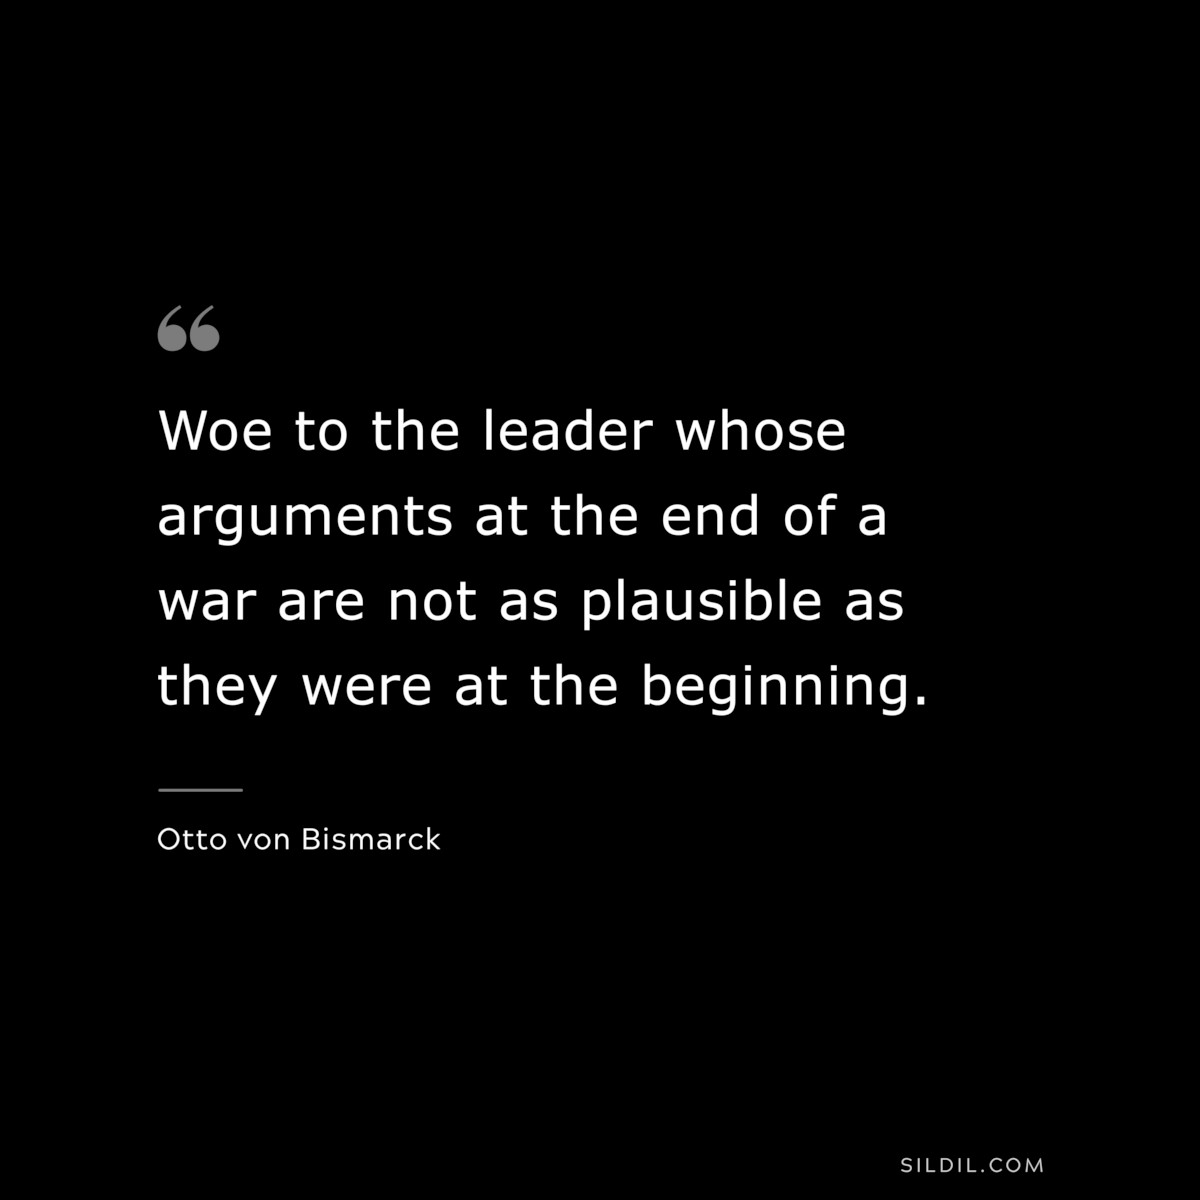 Woe to the leader whose arguments at the end of a war are not as plausible as they were at the beginning. ― Otto von Bismarck